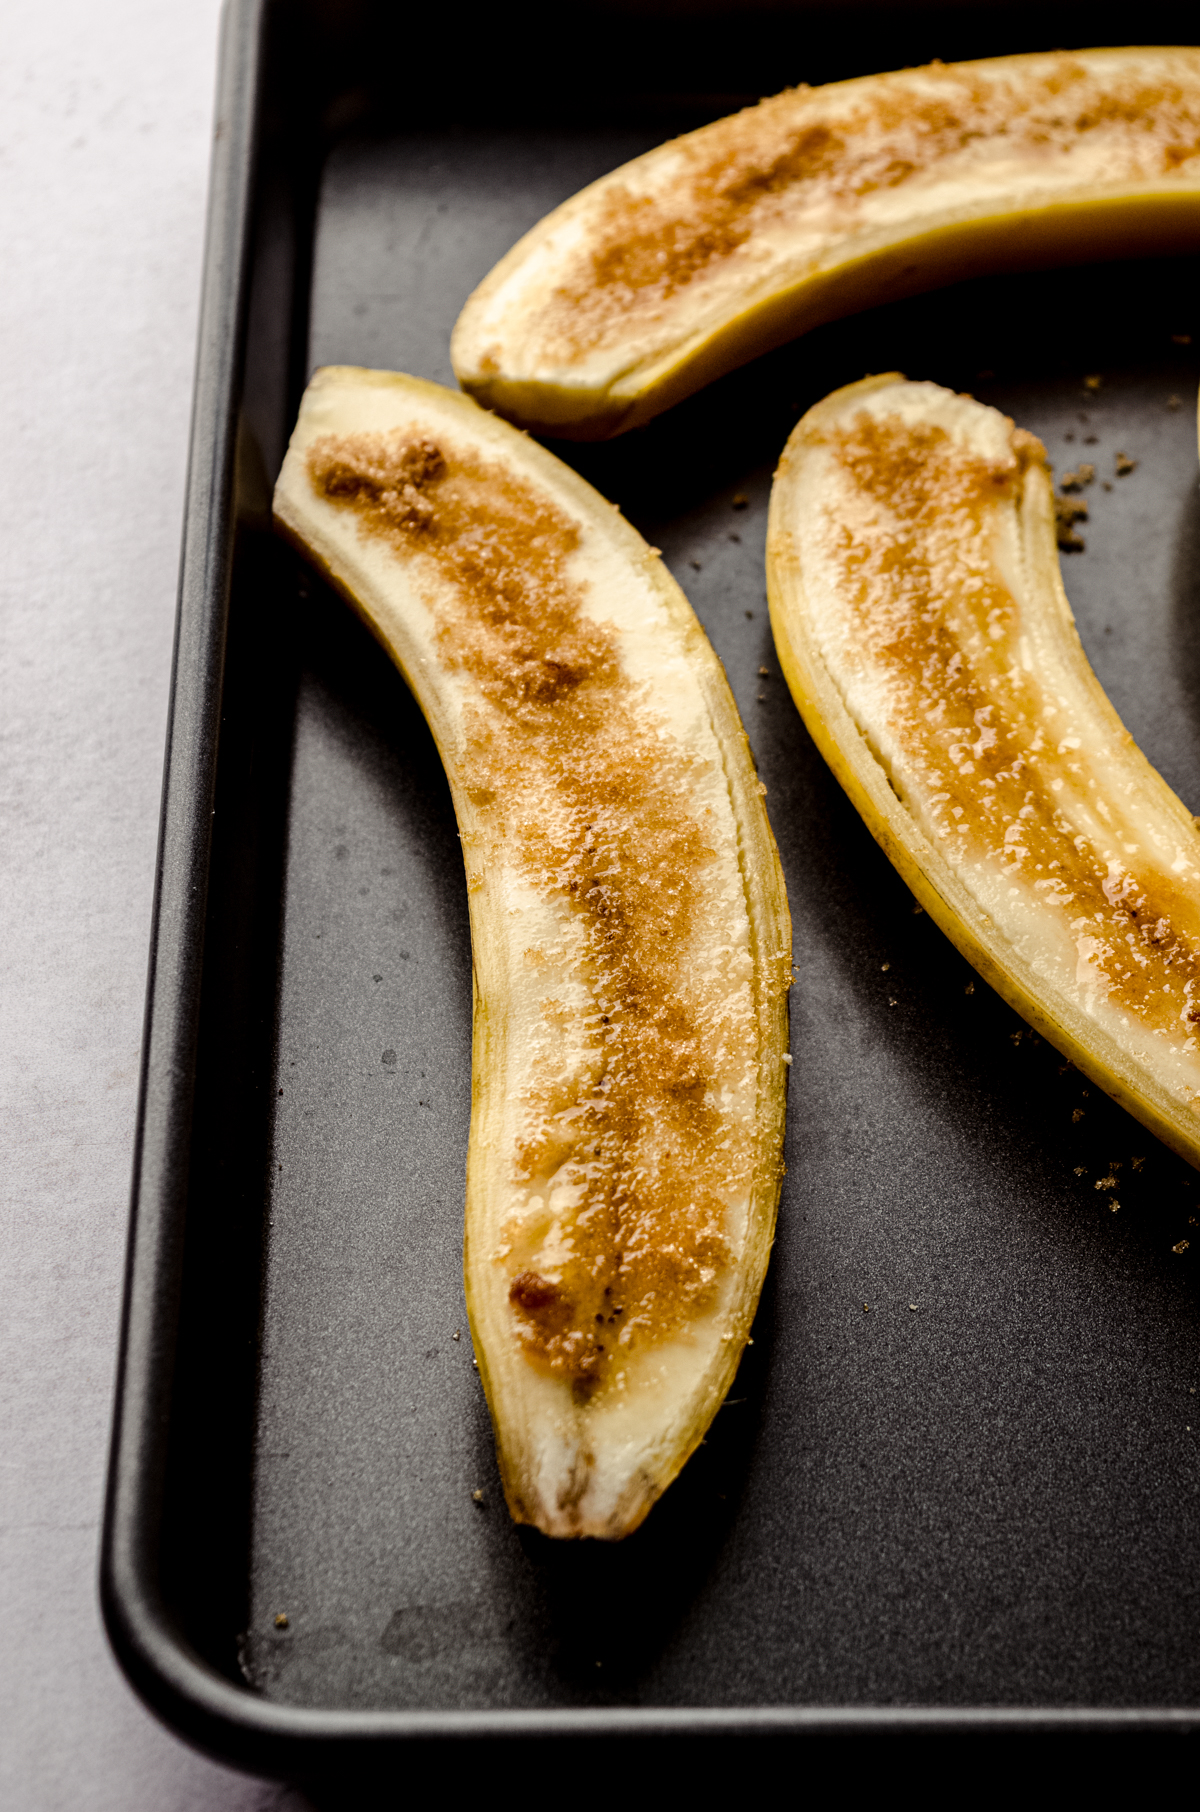 Bananas sliced long ways on a baking sheet sprinkled with brown sugar.